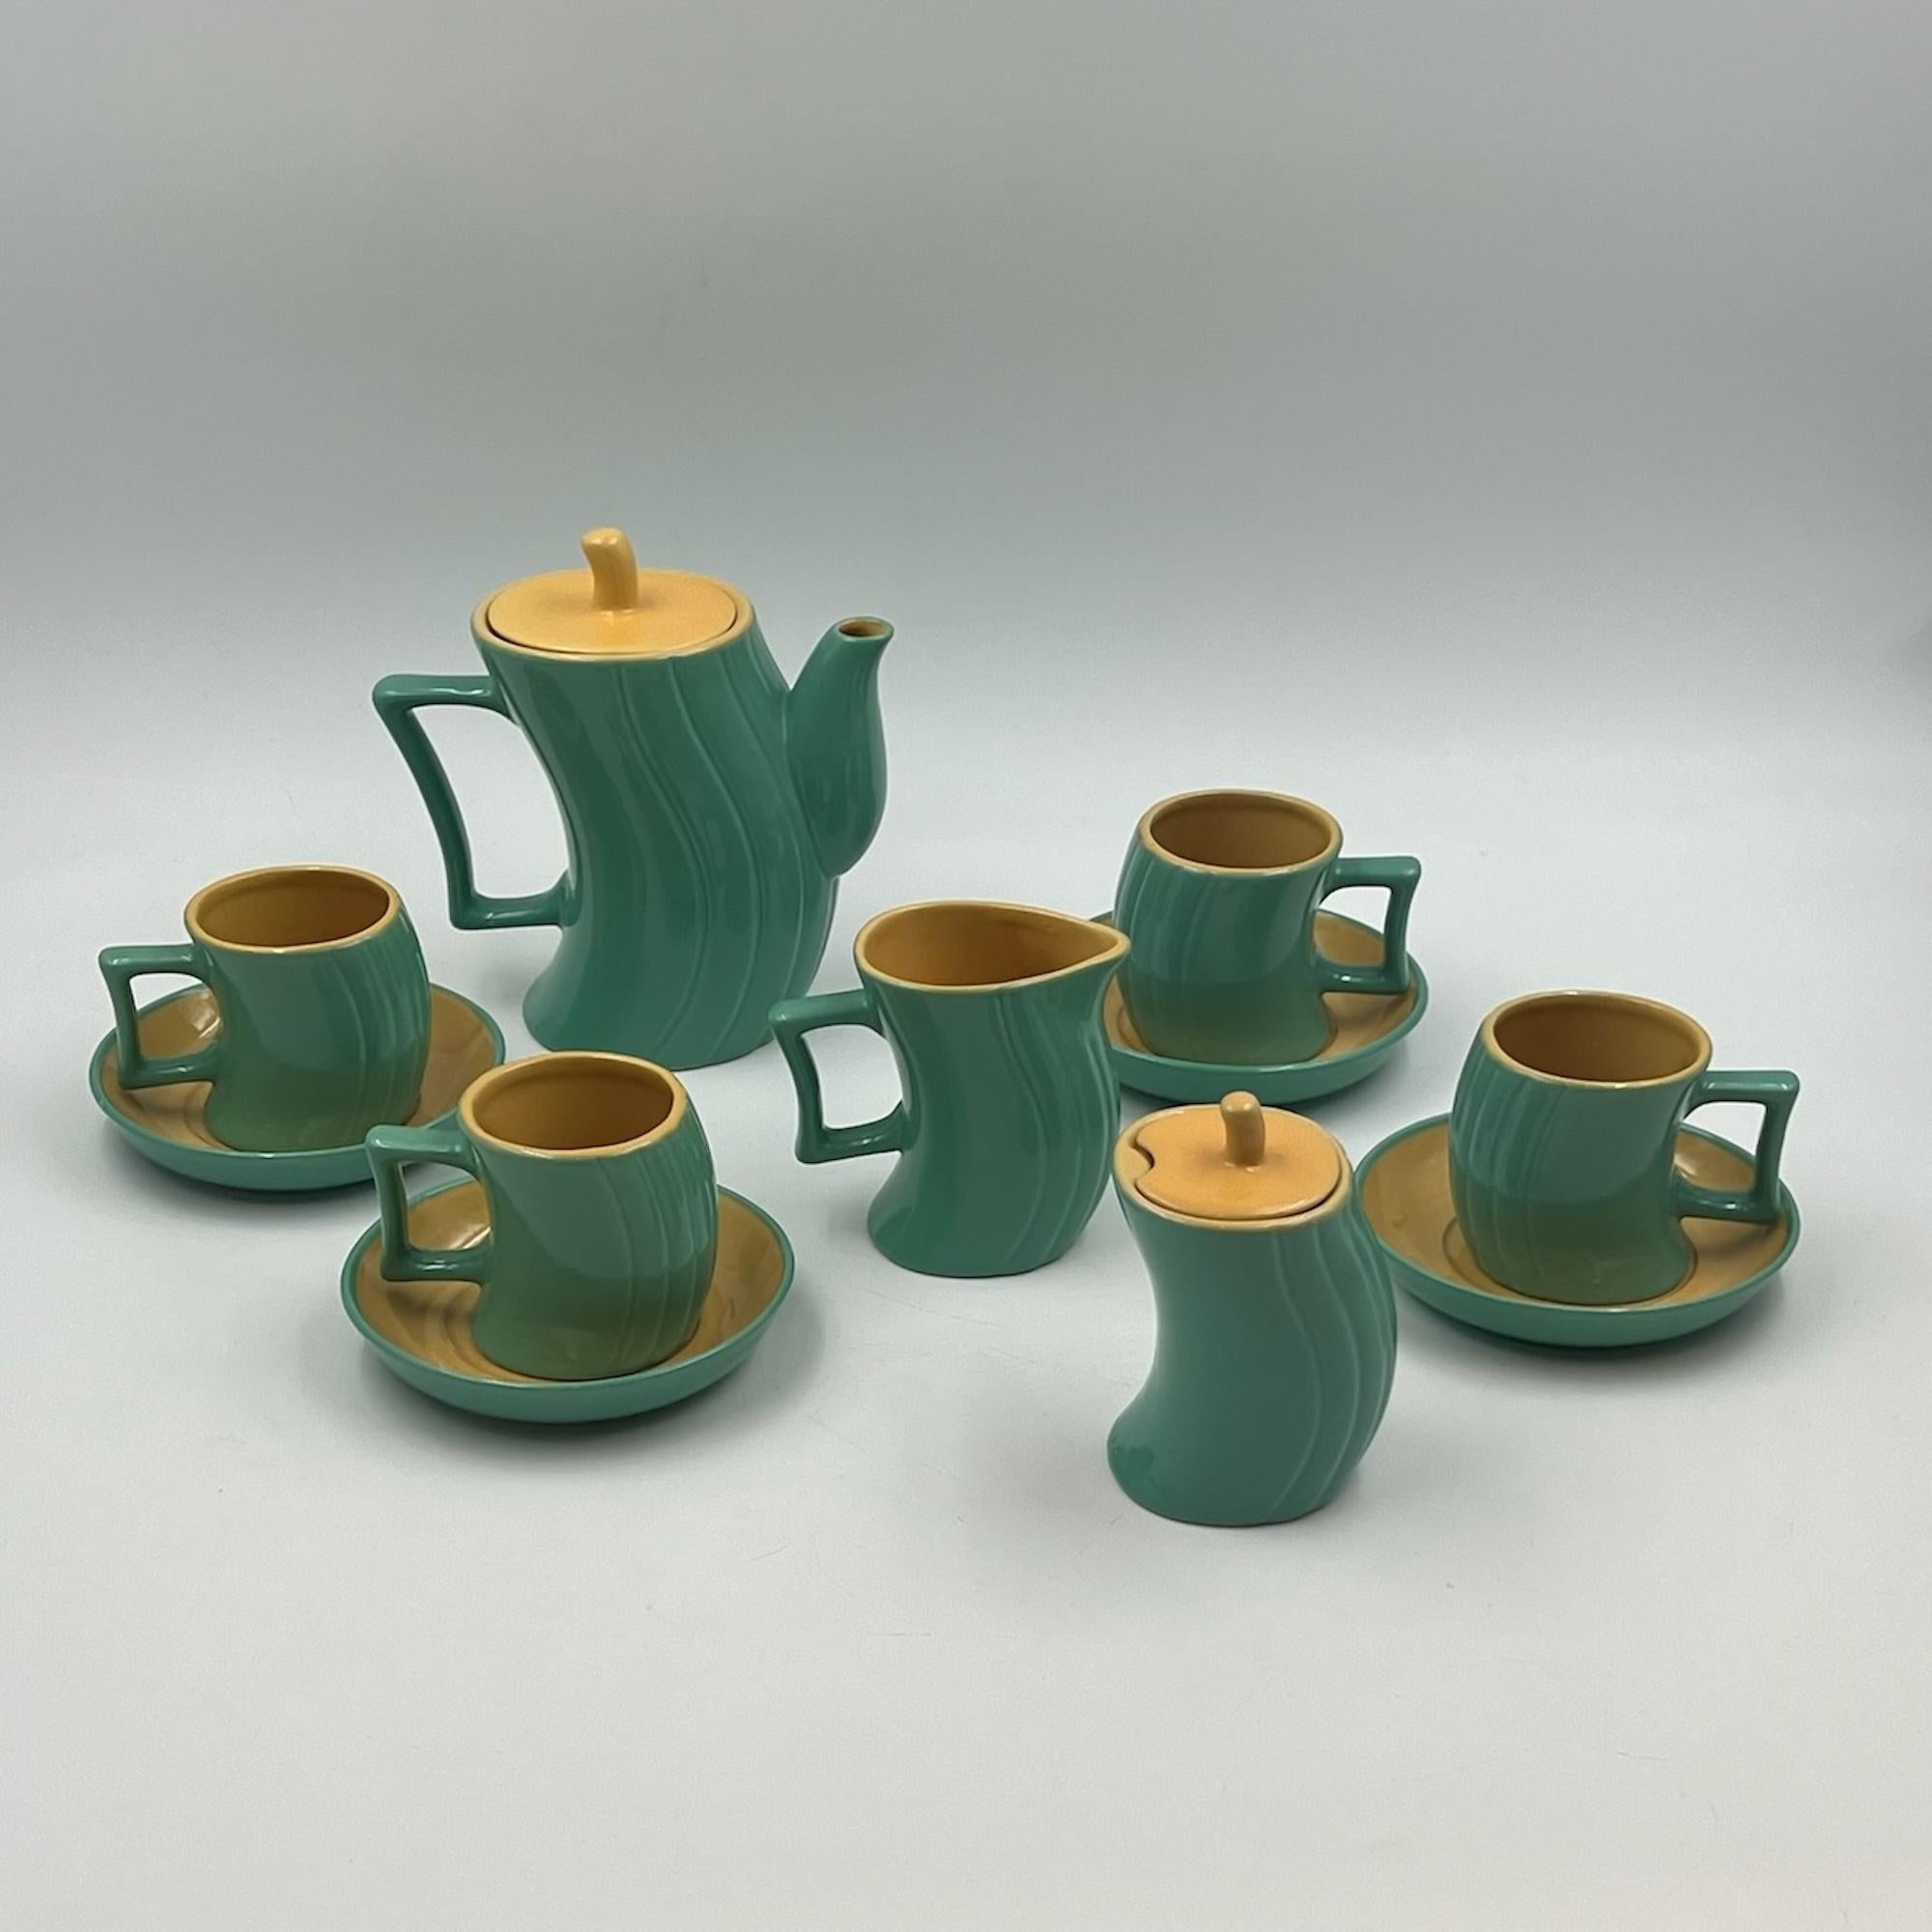 Experience the iconic style of the 80s design movement with this rare and amazing tea or coffee set designed by Massimo Iosa Ghini for Memphis Naj Oleari in the 1980s. This beautifully crafted ceramic set is a unique representation of the vibrant